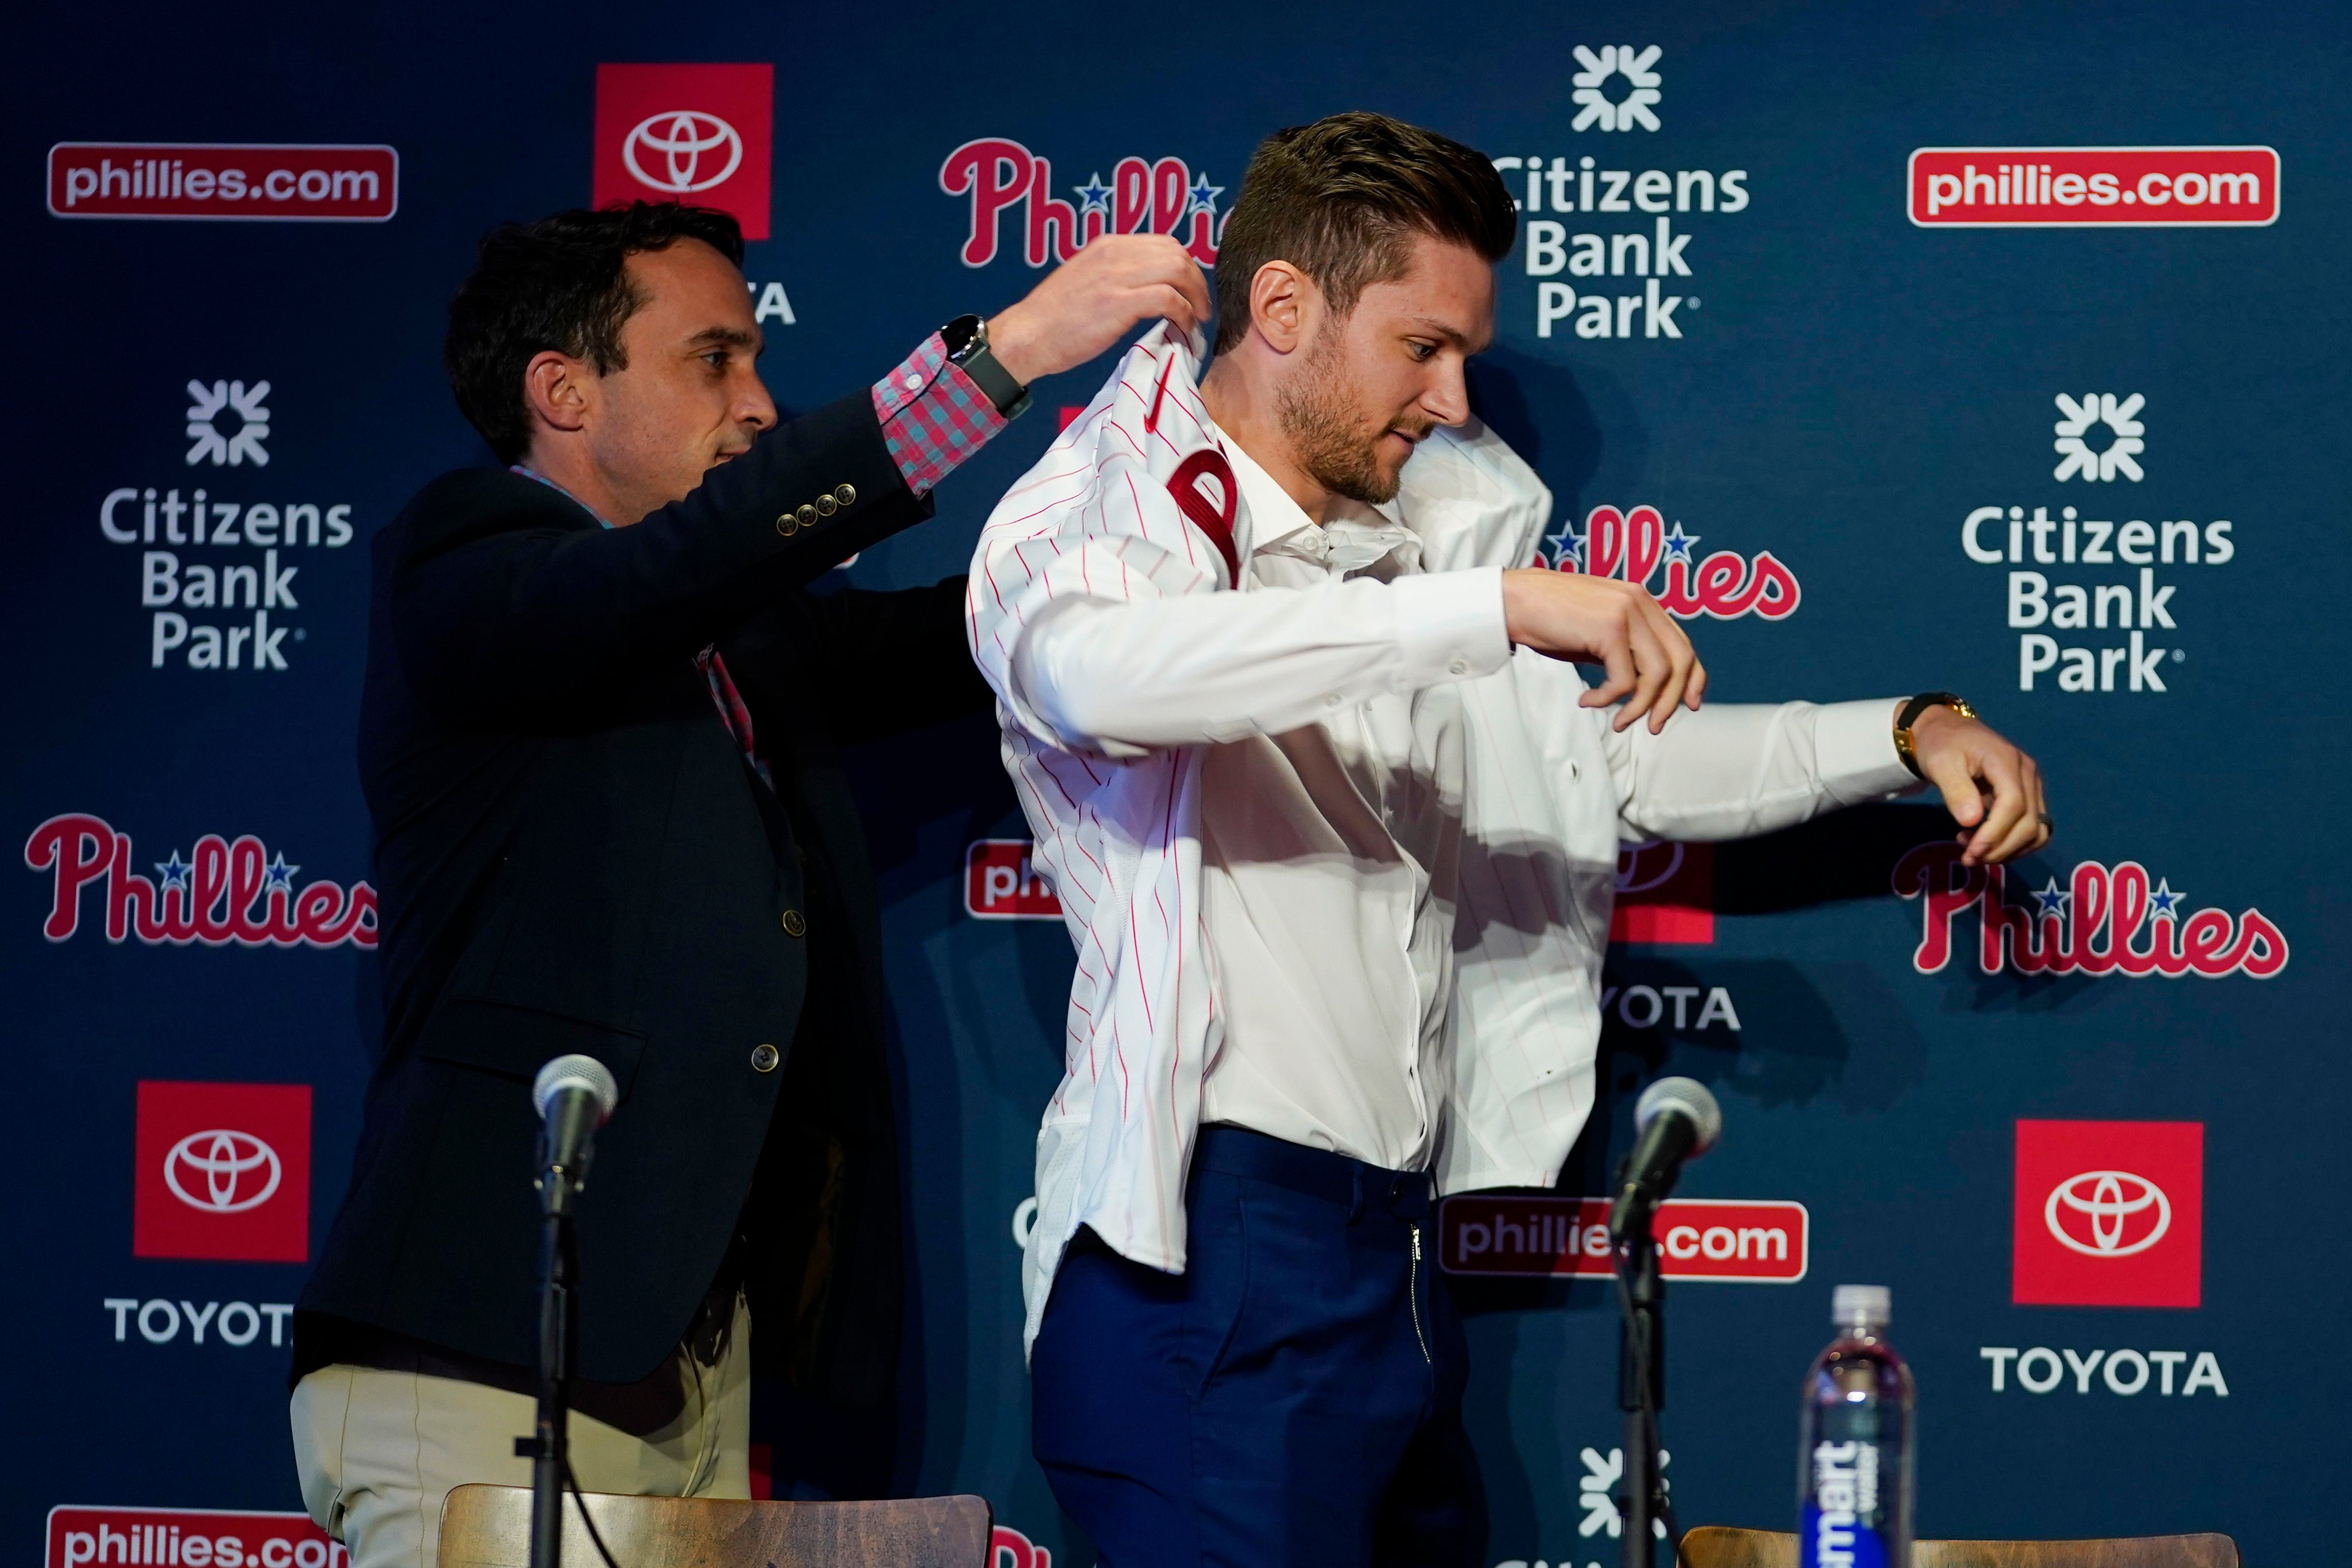 Revealed: Full contract details/incentives for Trea Turner  Phillies  Nation - Your source for Philadelphia Phillies news, opinion, history,  rumors, events, and other fun stuff.